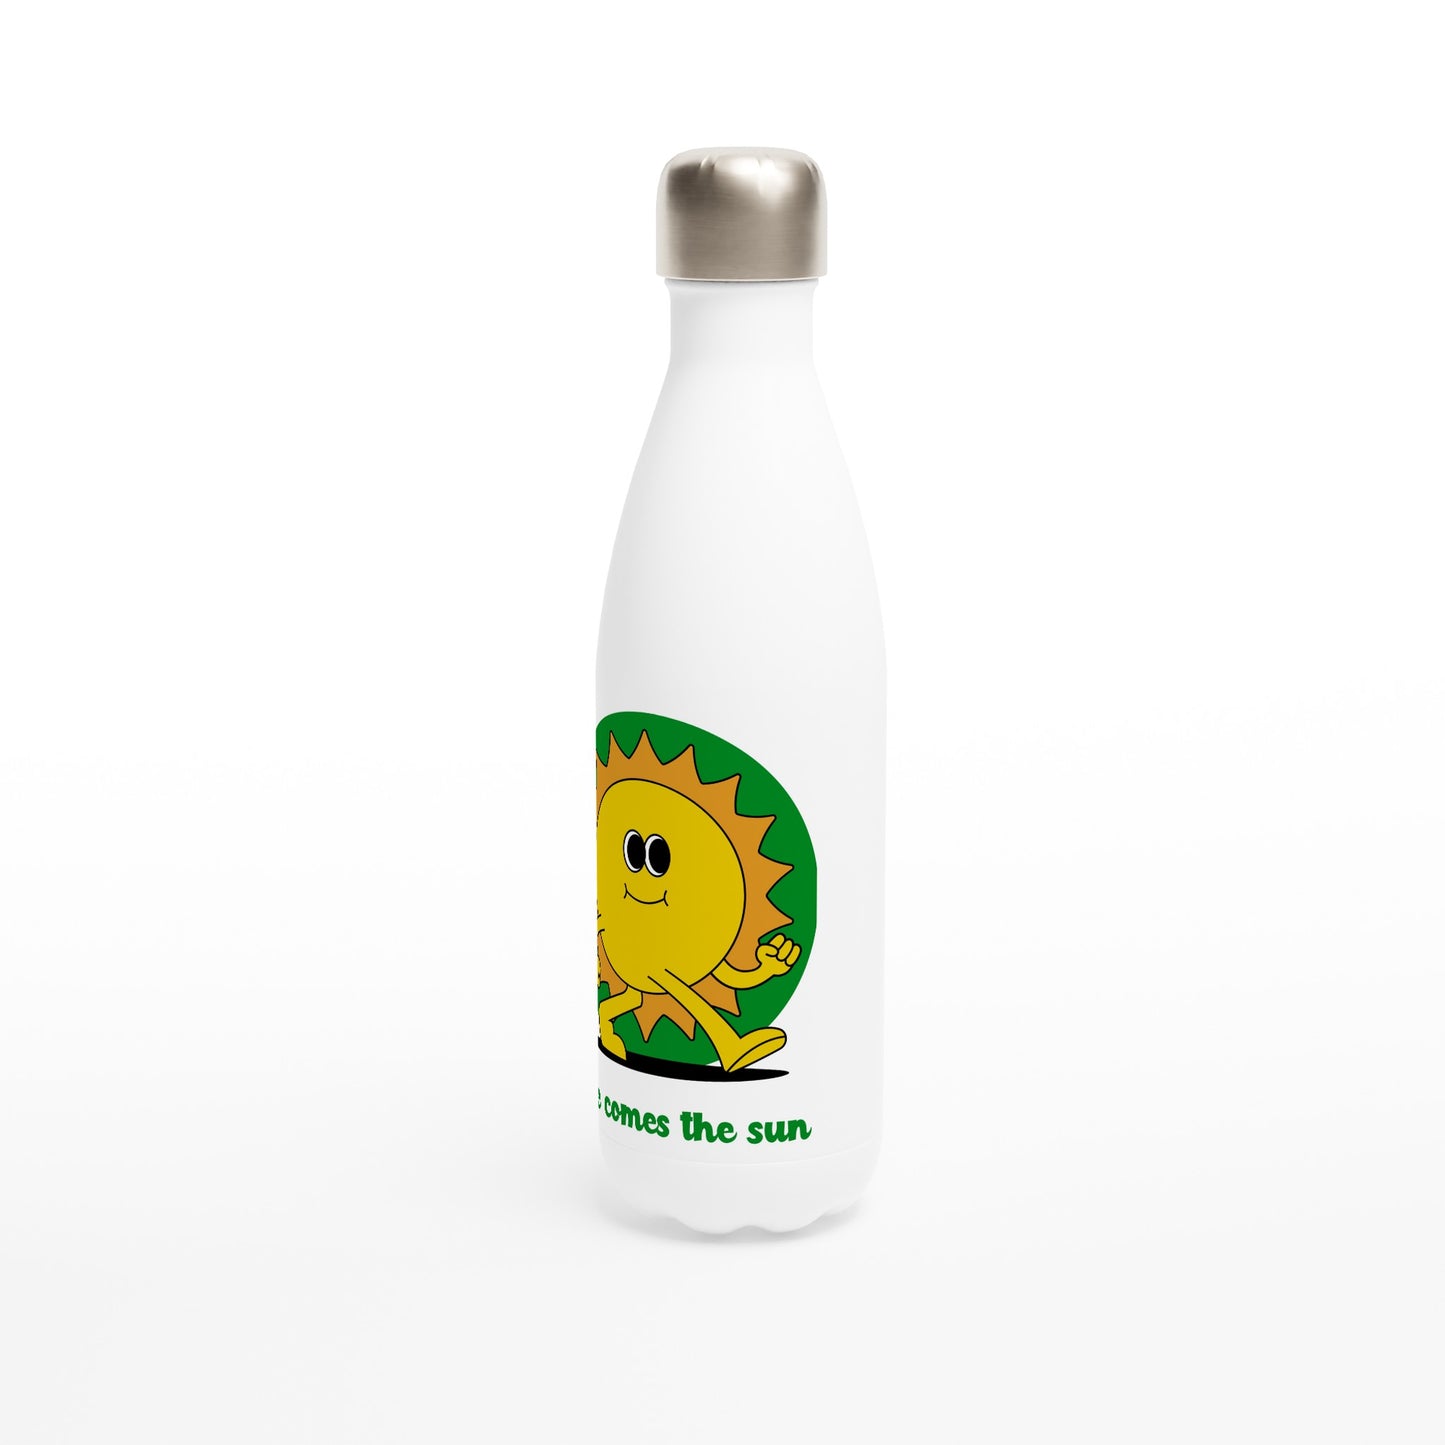 Here Comes The Sun - White 17oz Stainless Steel Water Bottle White Water Bottle Retro Summer